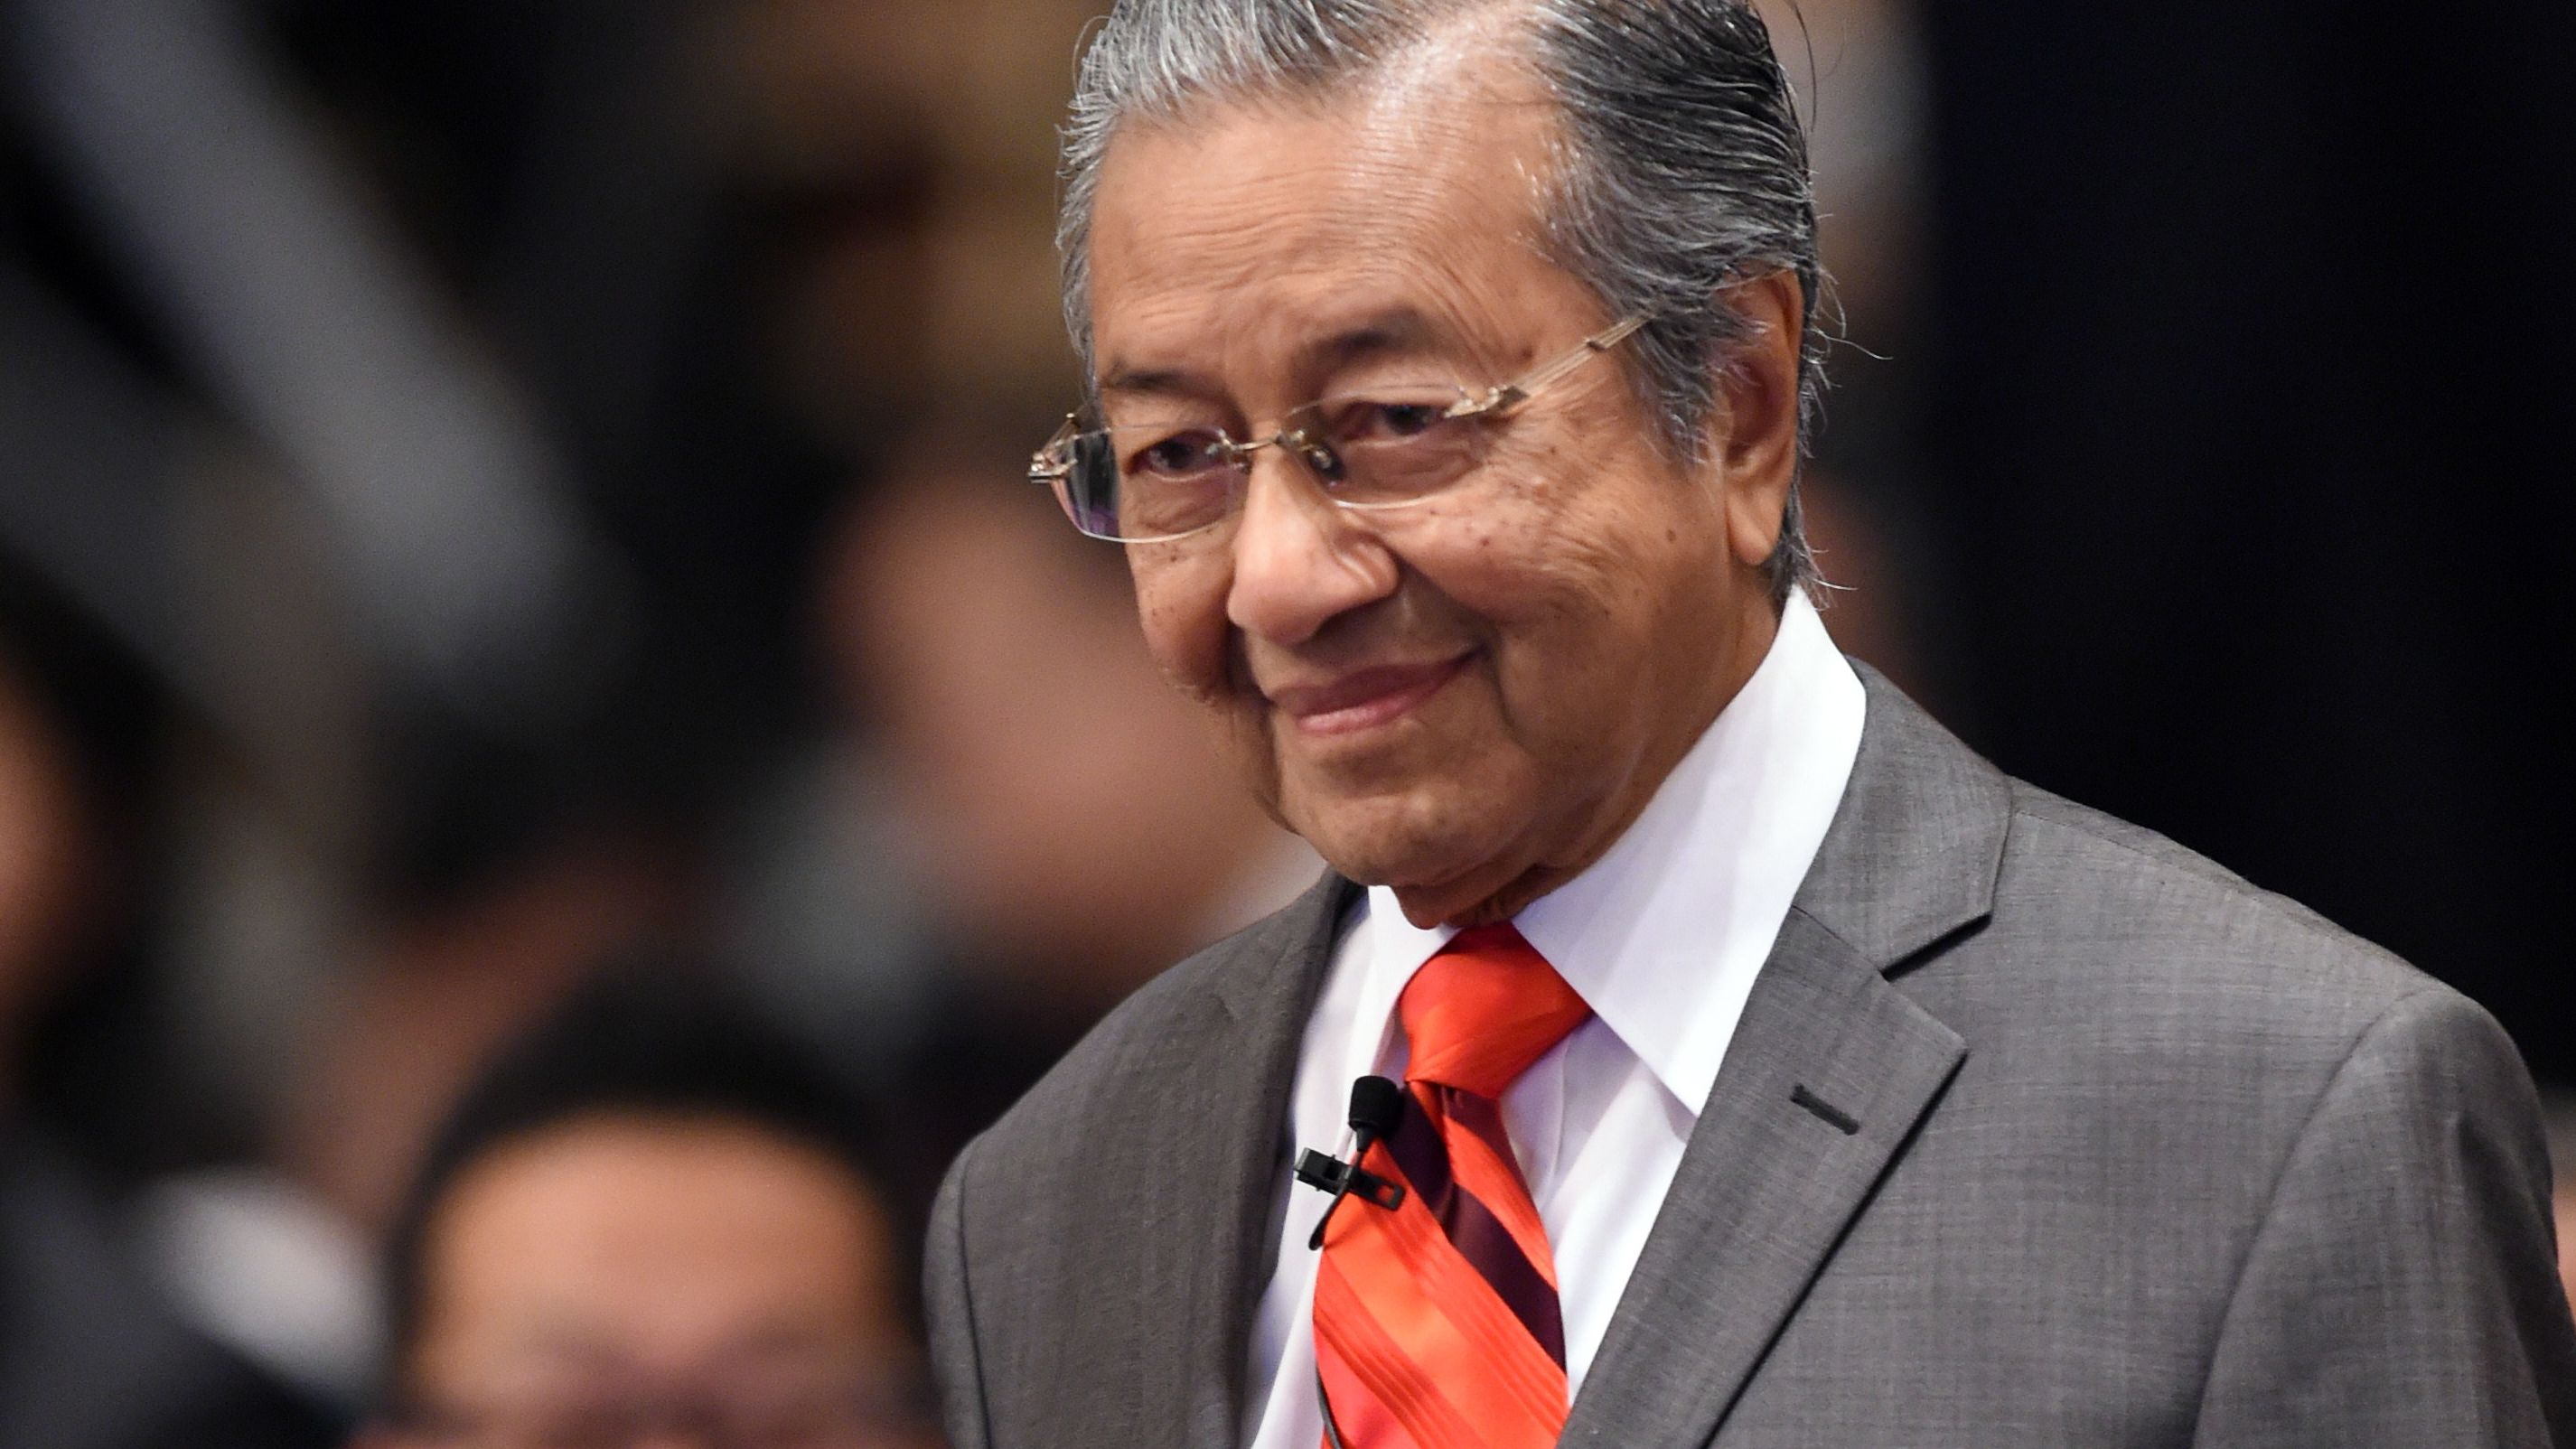 Former Malaysian prime minister Mahathir bin Mohamad arrives to hold a dialogue session in the 20th International Conference on the Future of Asia in Tokyo on May 22, 2014. The two-day conference was held with the theme of "Rising Asia - Messages for the Next 20 Years." 